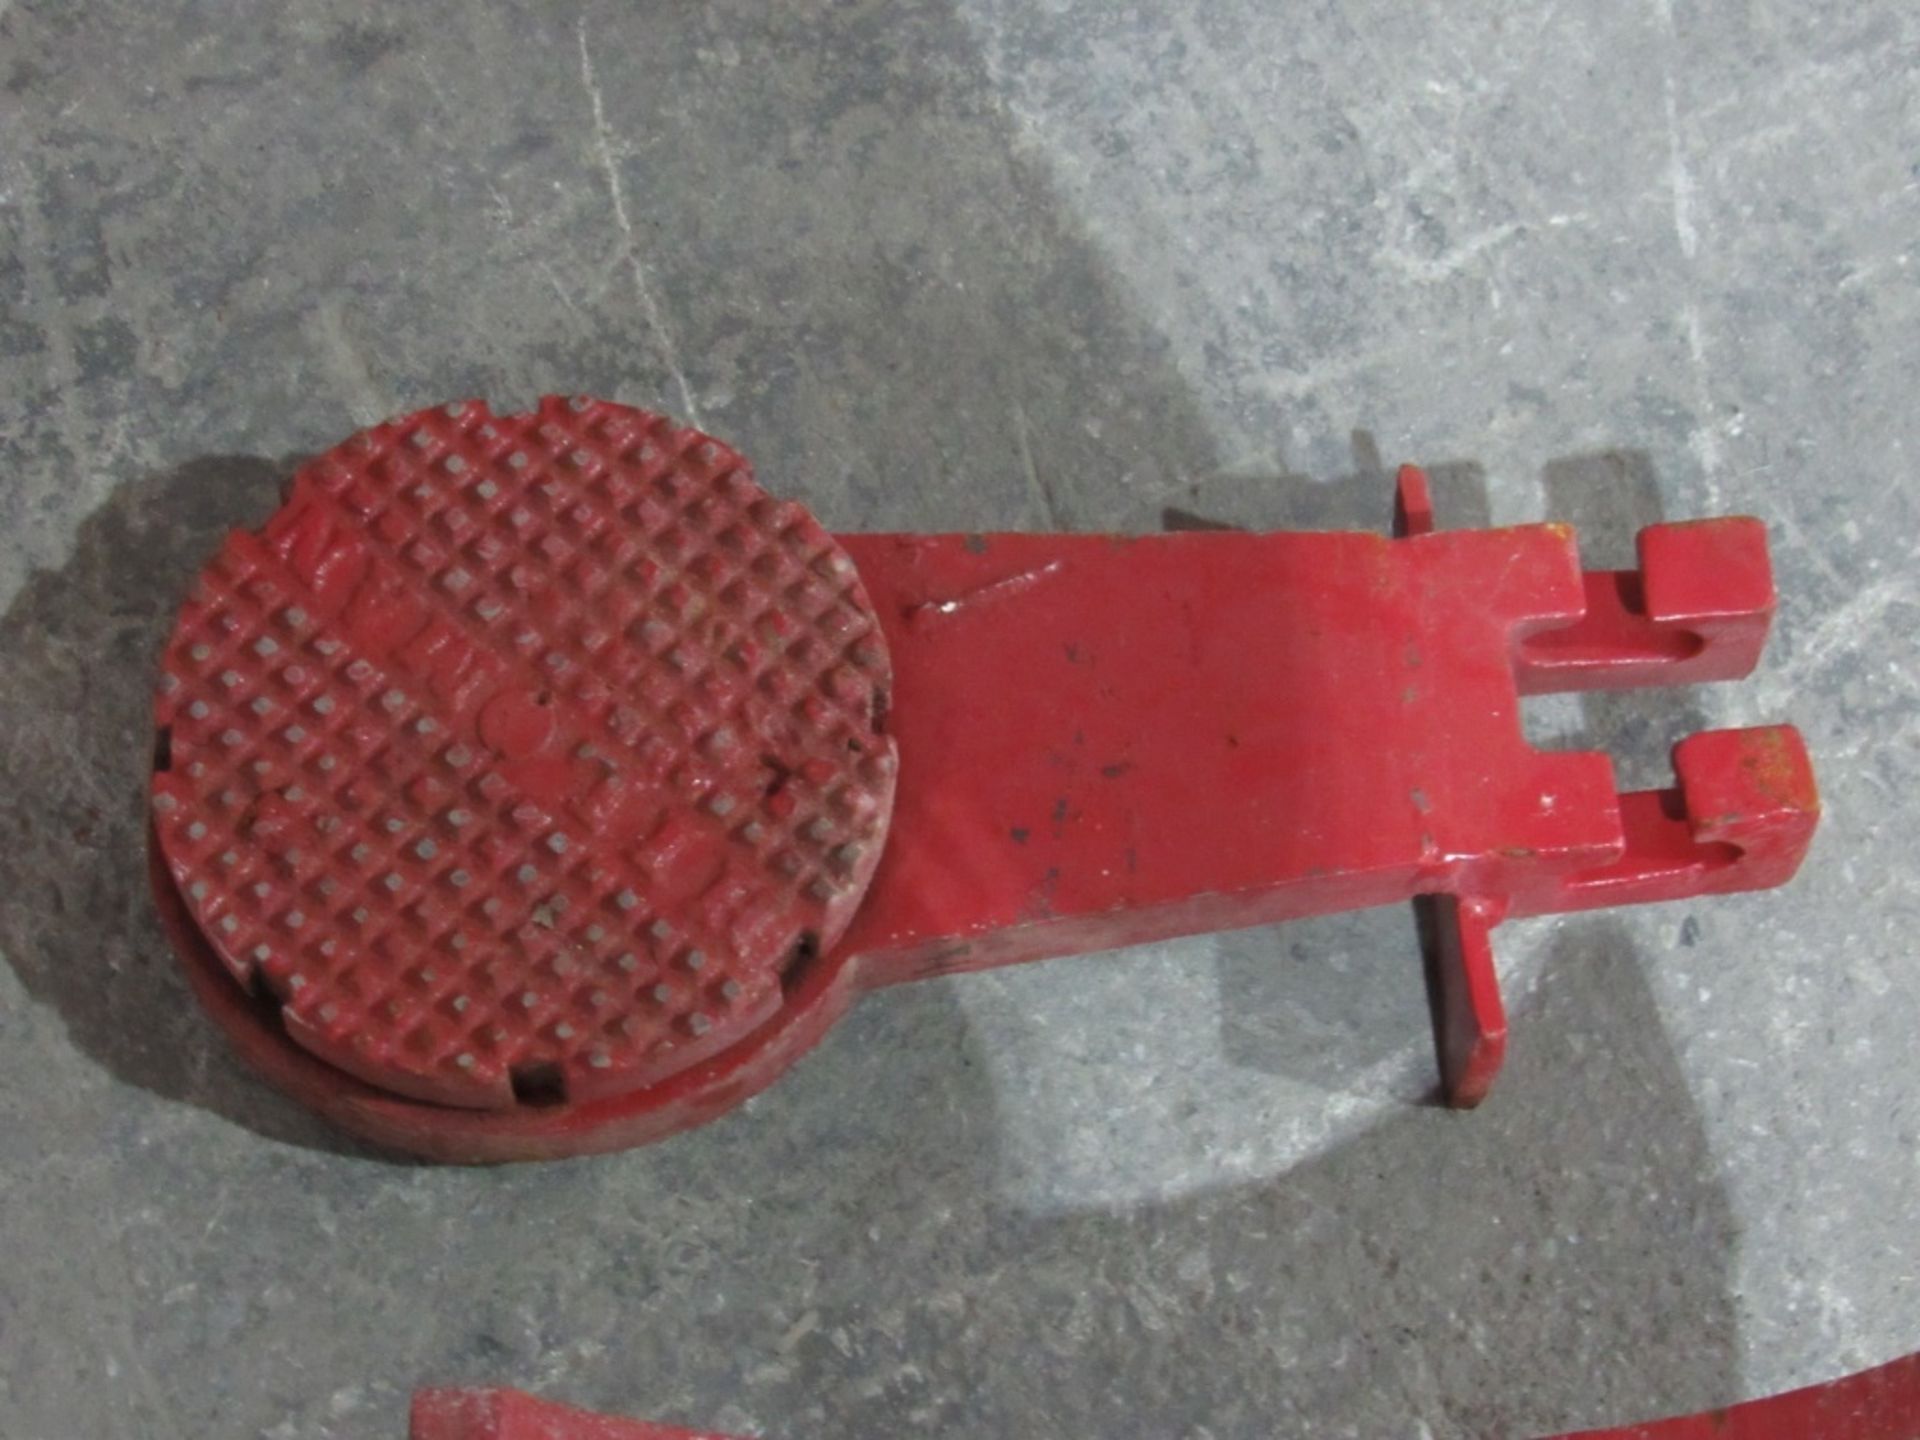 3 Ton Machinery Mover- MFR - Unknown 3 Ton Overall Dimensions - 13" x 9" x 4" - Image 3 of 6